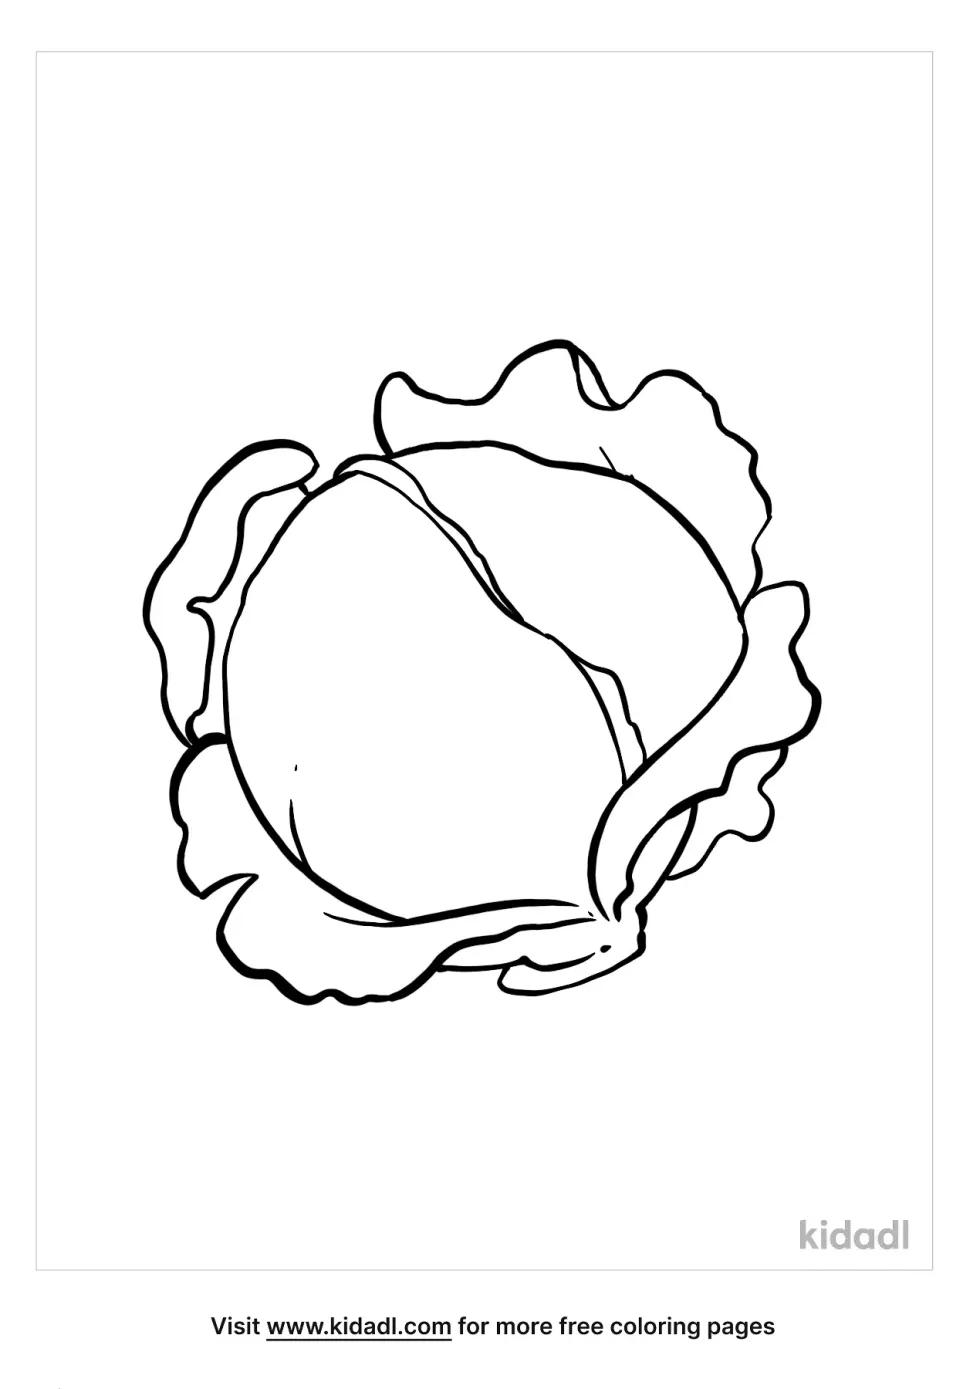 Cabbage Coloring Page